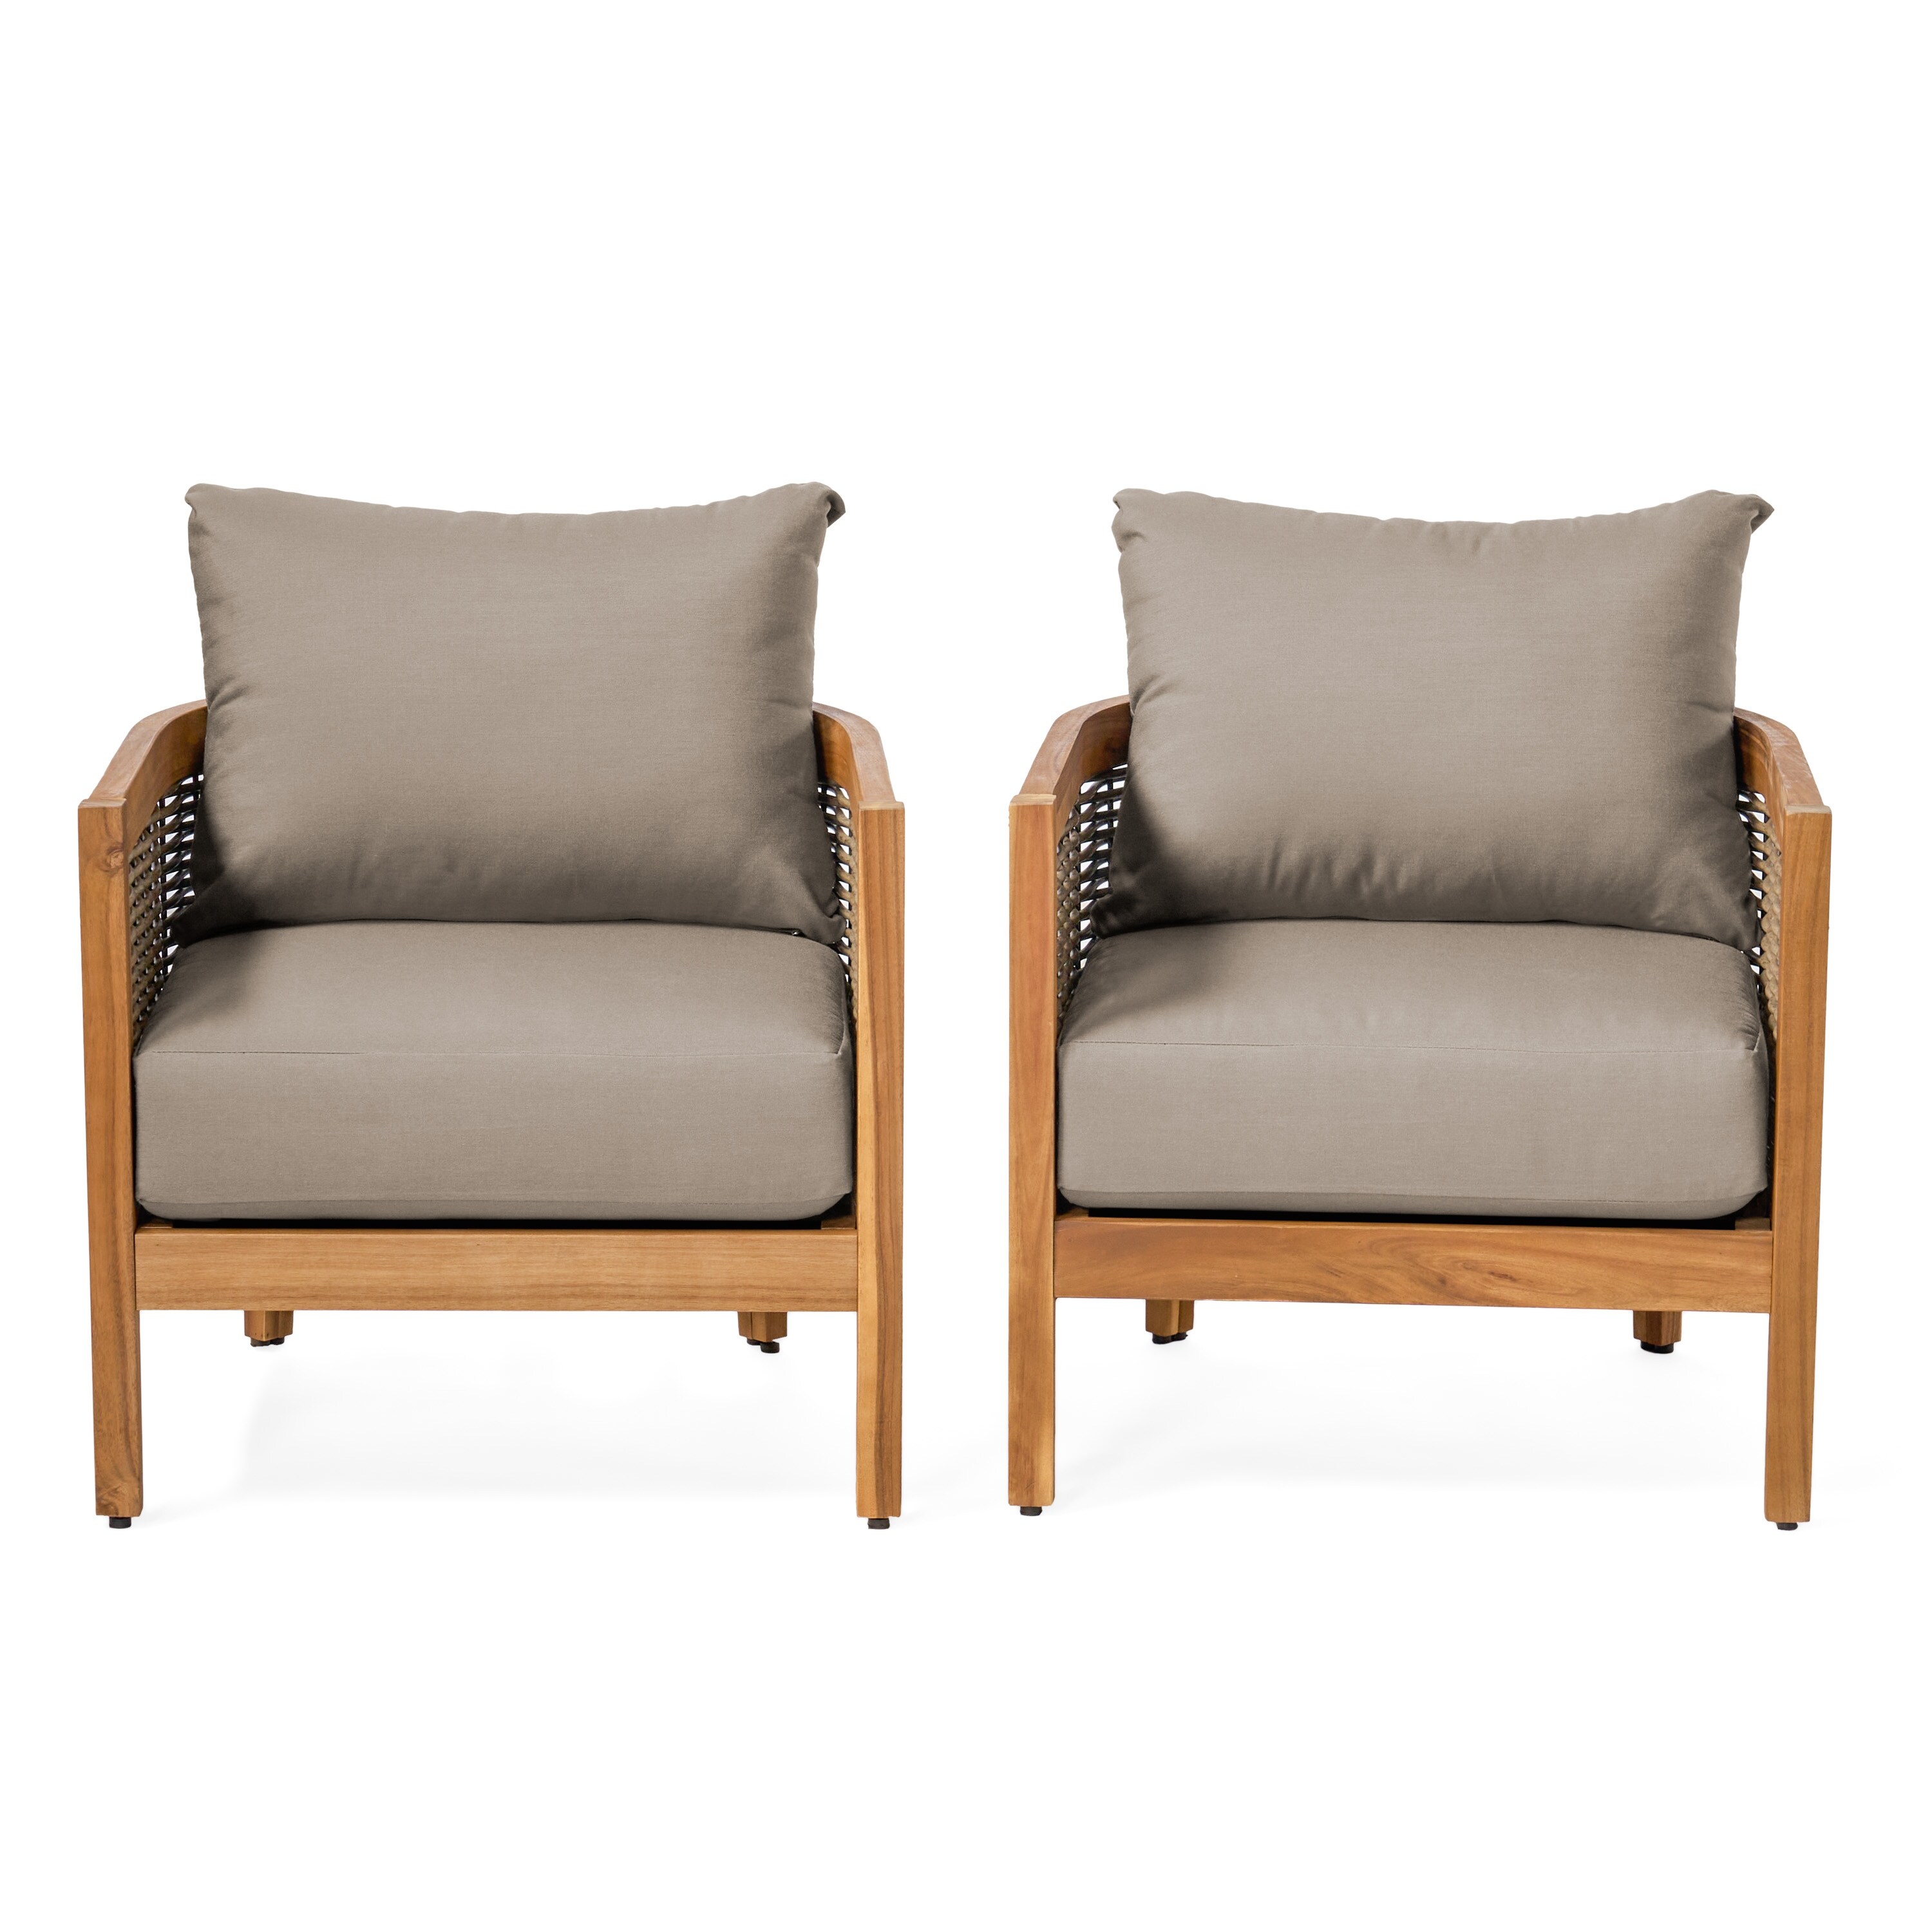 Burchett Outdoor Acacia Wood and Wicker Club Chairs (Set of 2) with  Optional Sunbrella Cushions by Christopher Knight Home - On Sale - Bed Bath  & Beyond - 32221830